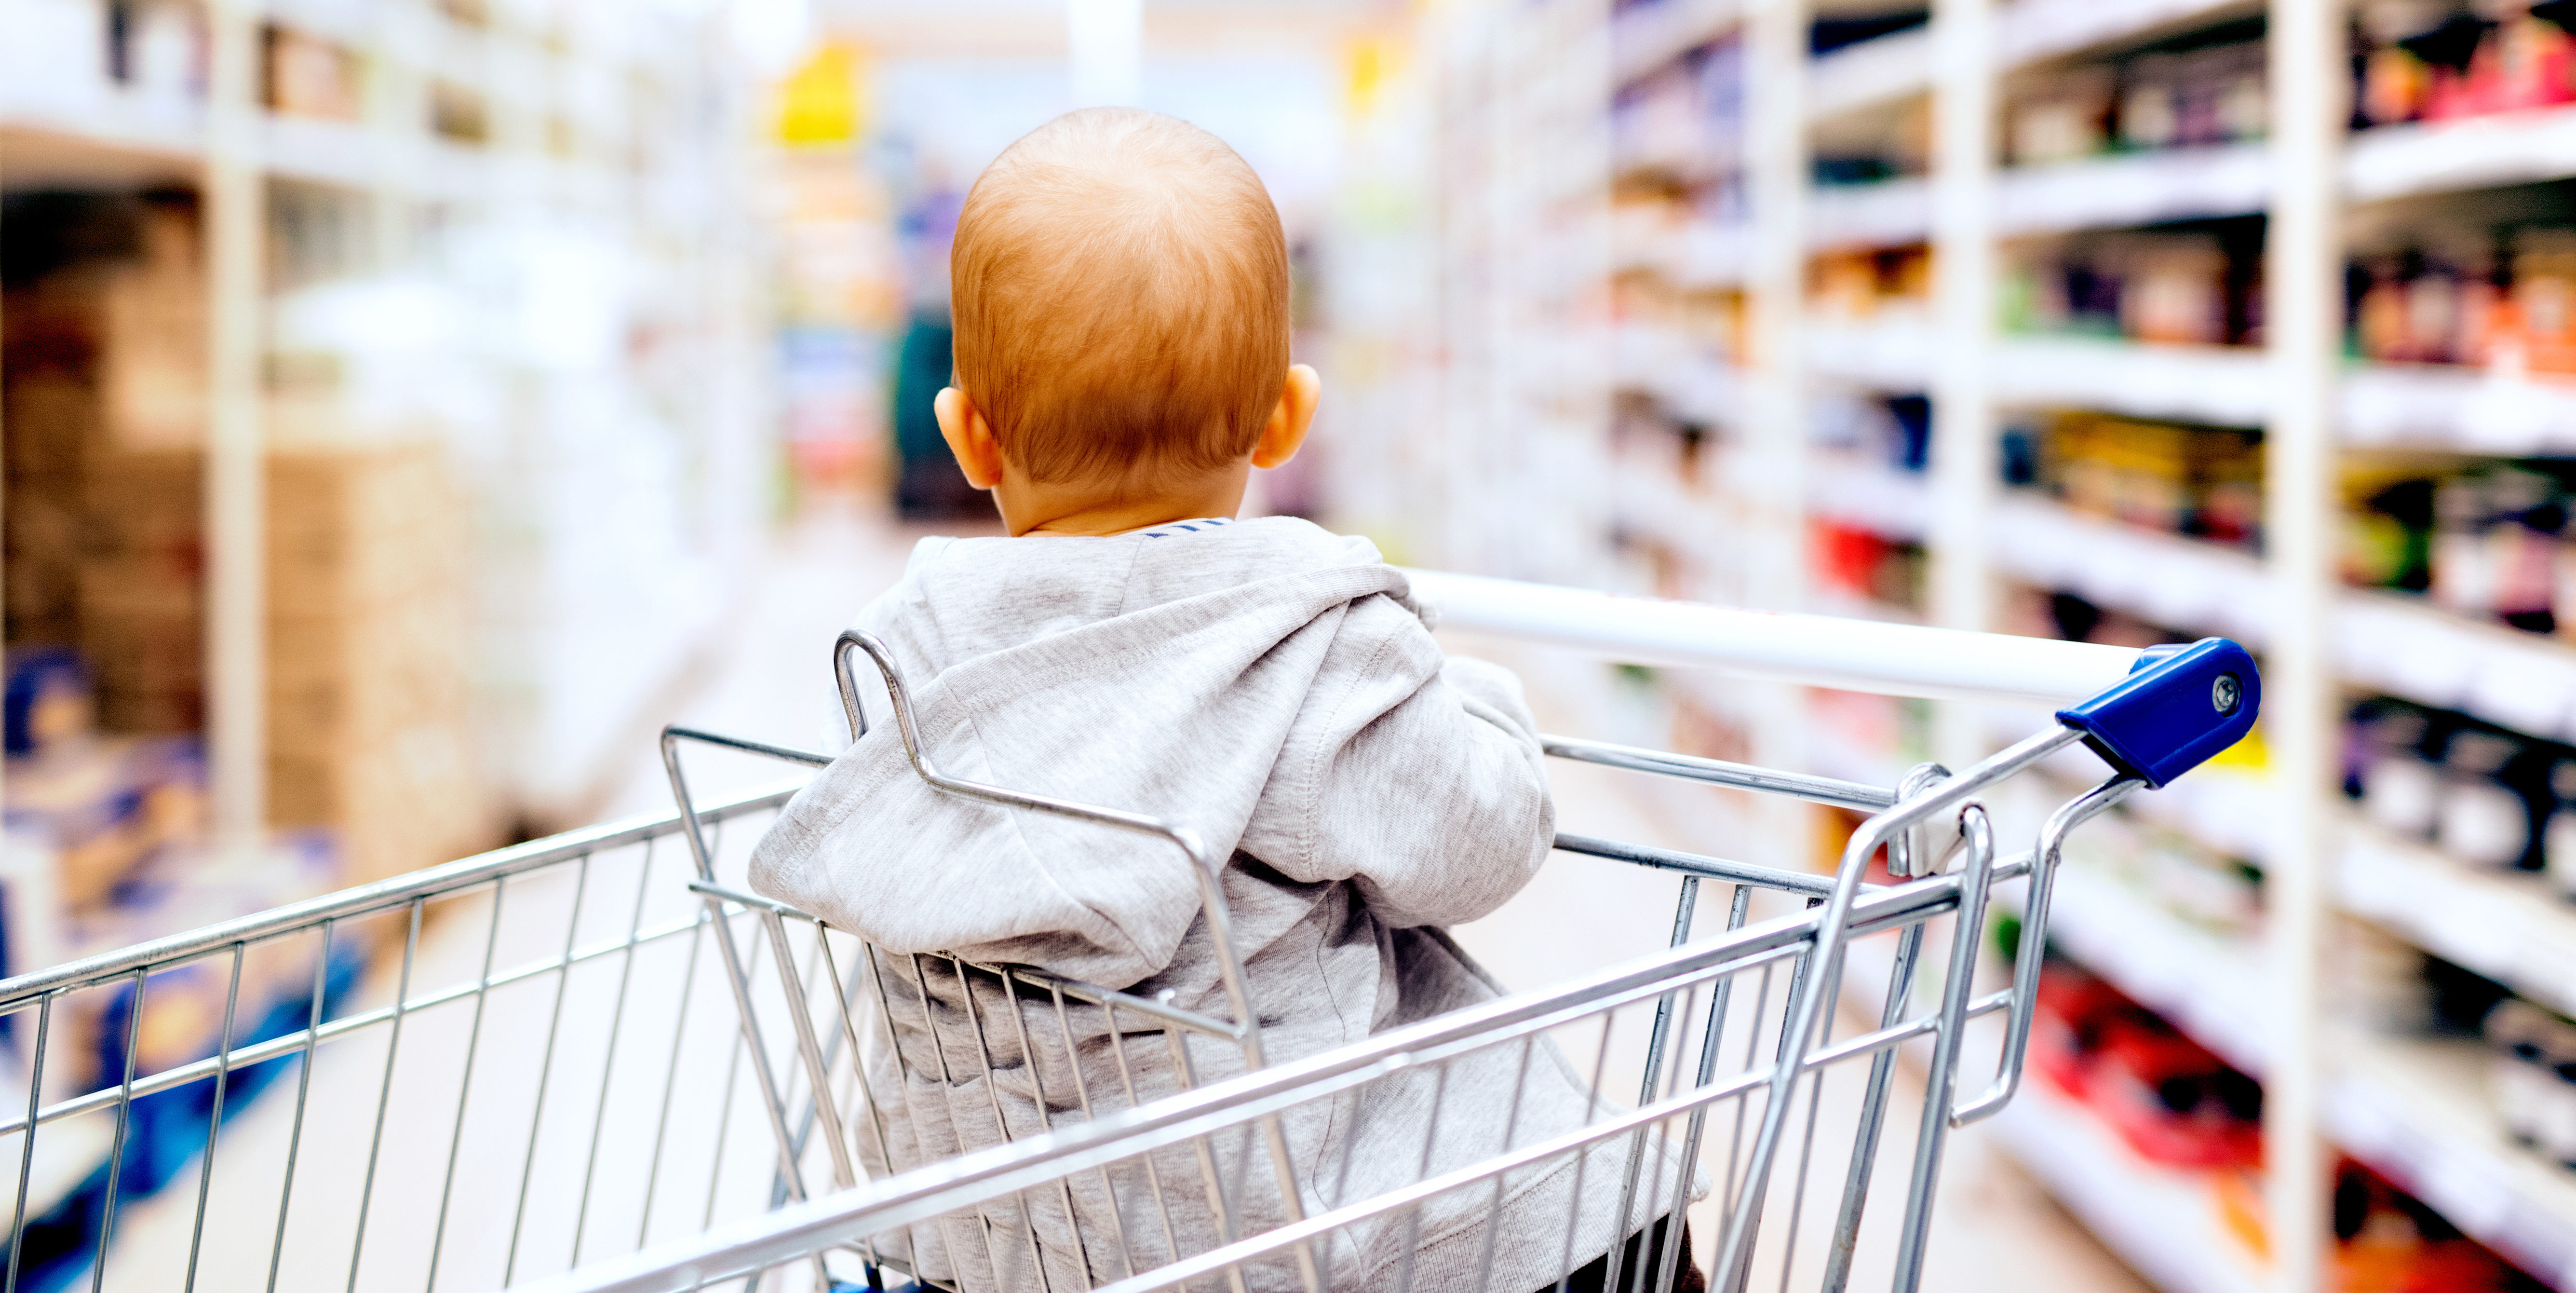 Chemicals Revealed. The State of Chemicals in Children's Products